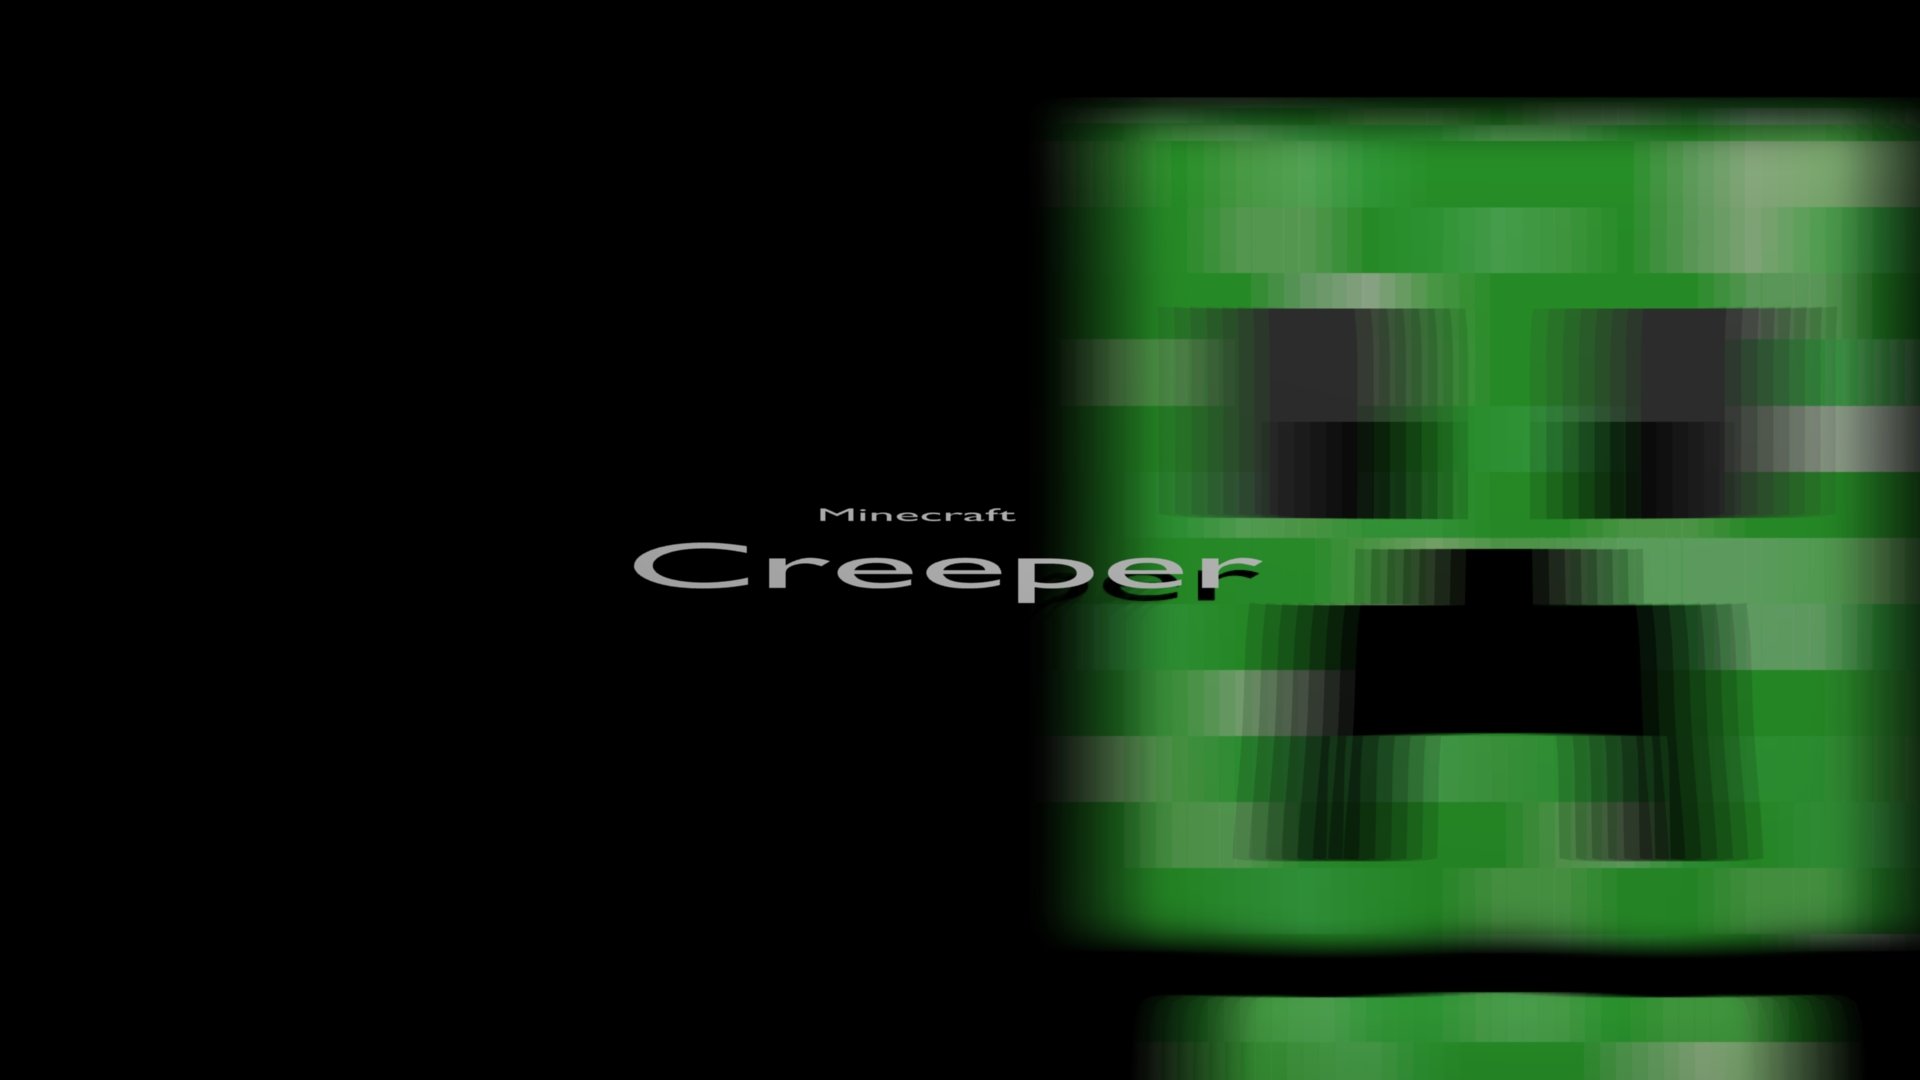 Free download Minecraft Cool Wallpapers Creeper Creeper Minecraft